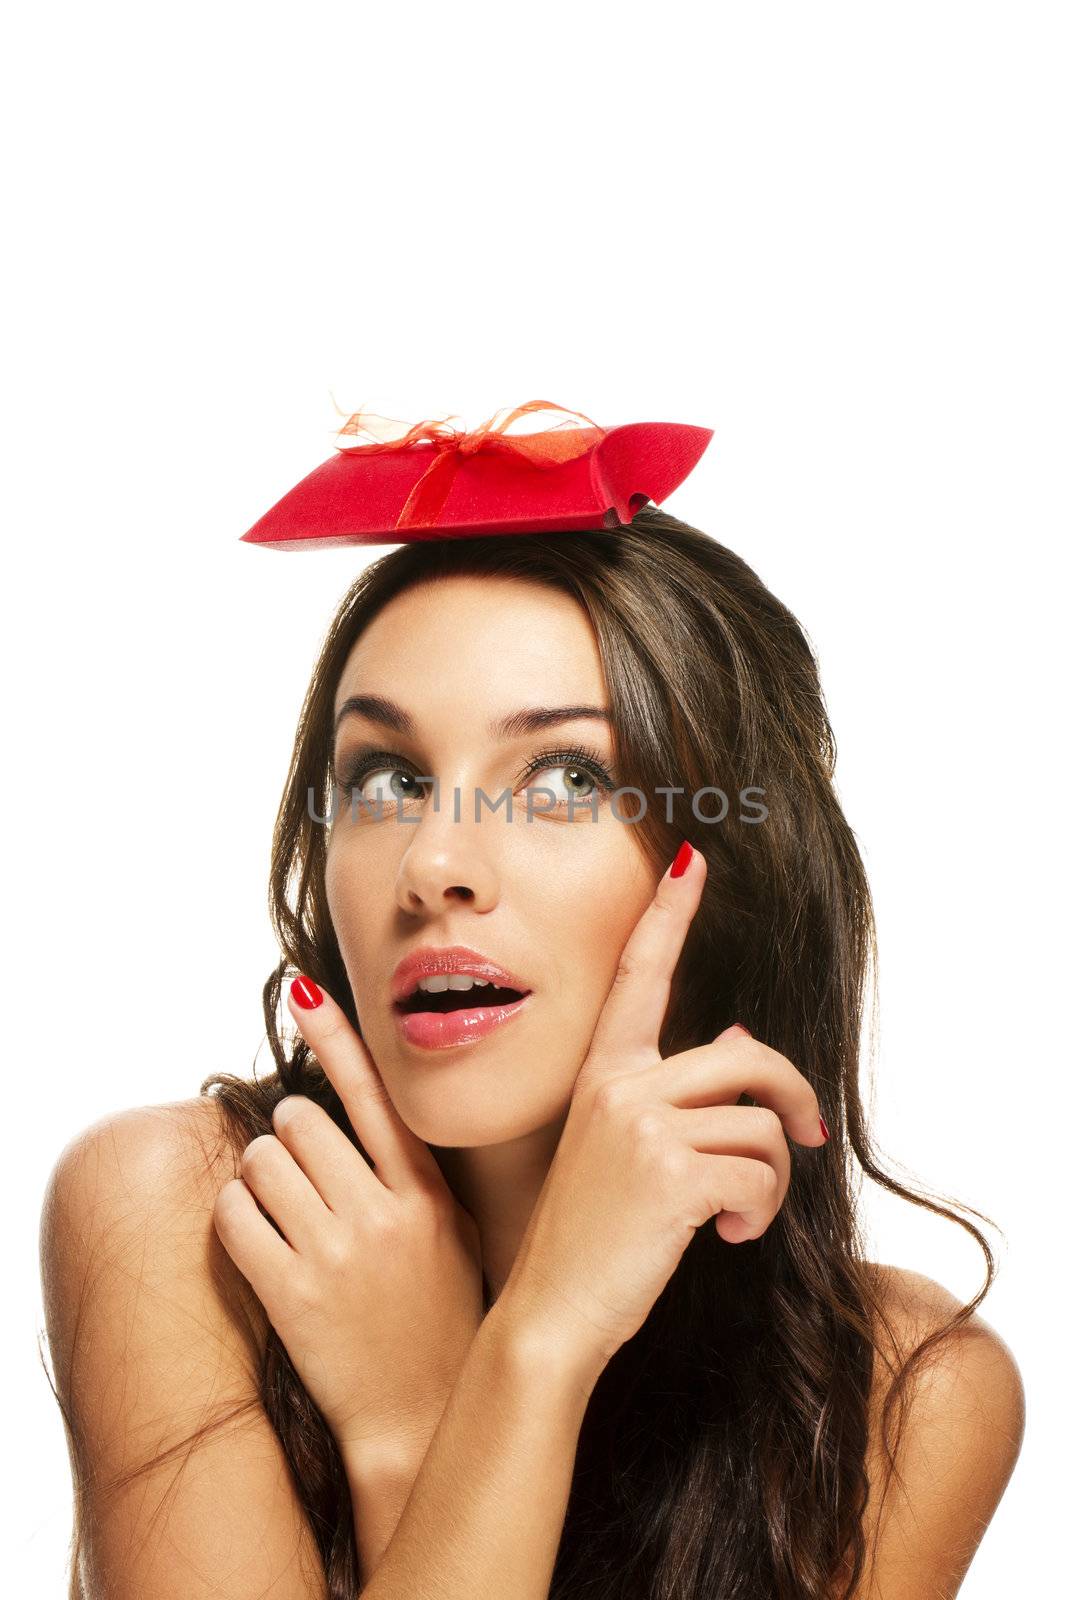 woman pointing with her fingers to the present on her head on white background